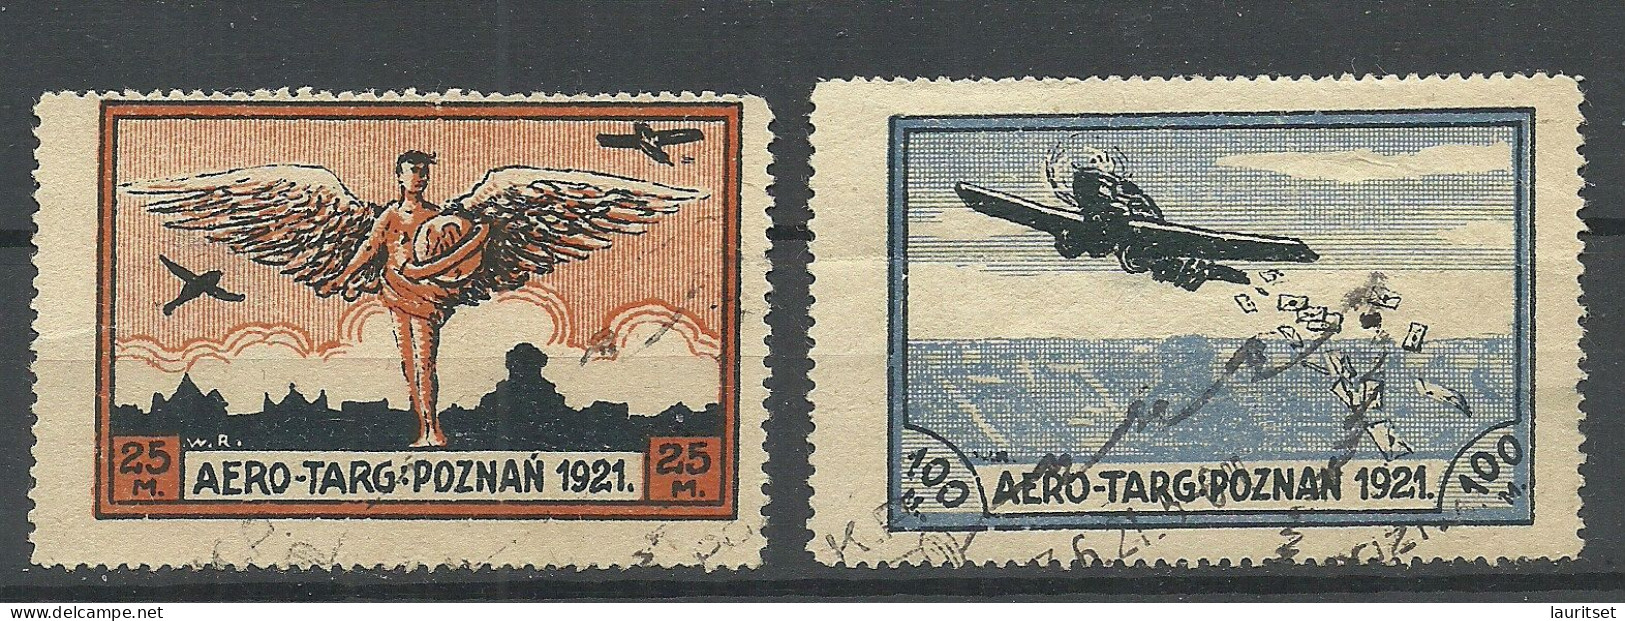 POLEN Poland 1921 Michel I - II Aviation Air Mail Poznan Aero Stamps O NB! Faults! Thinned Places! - Gebraucht